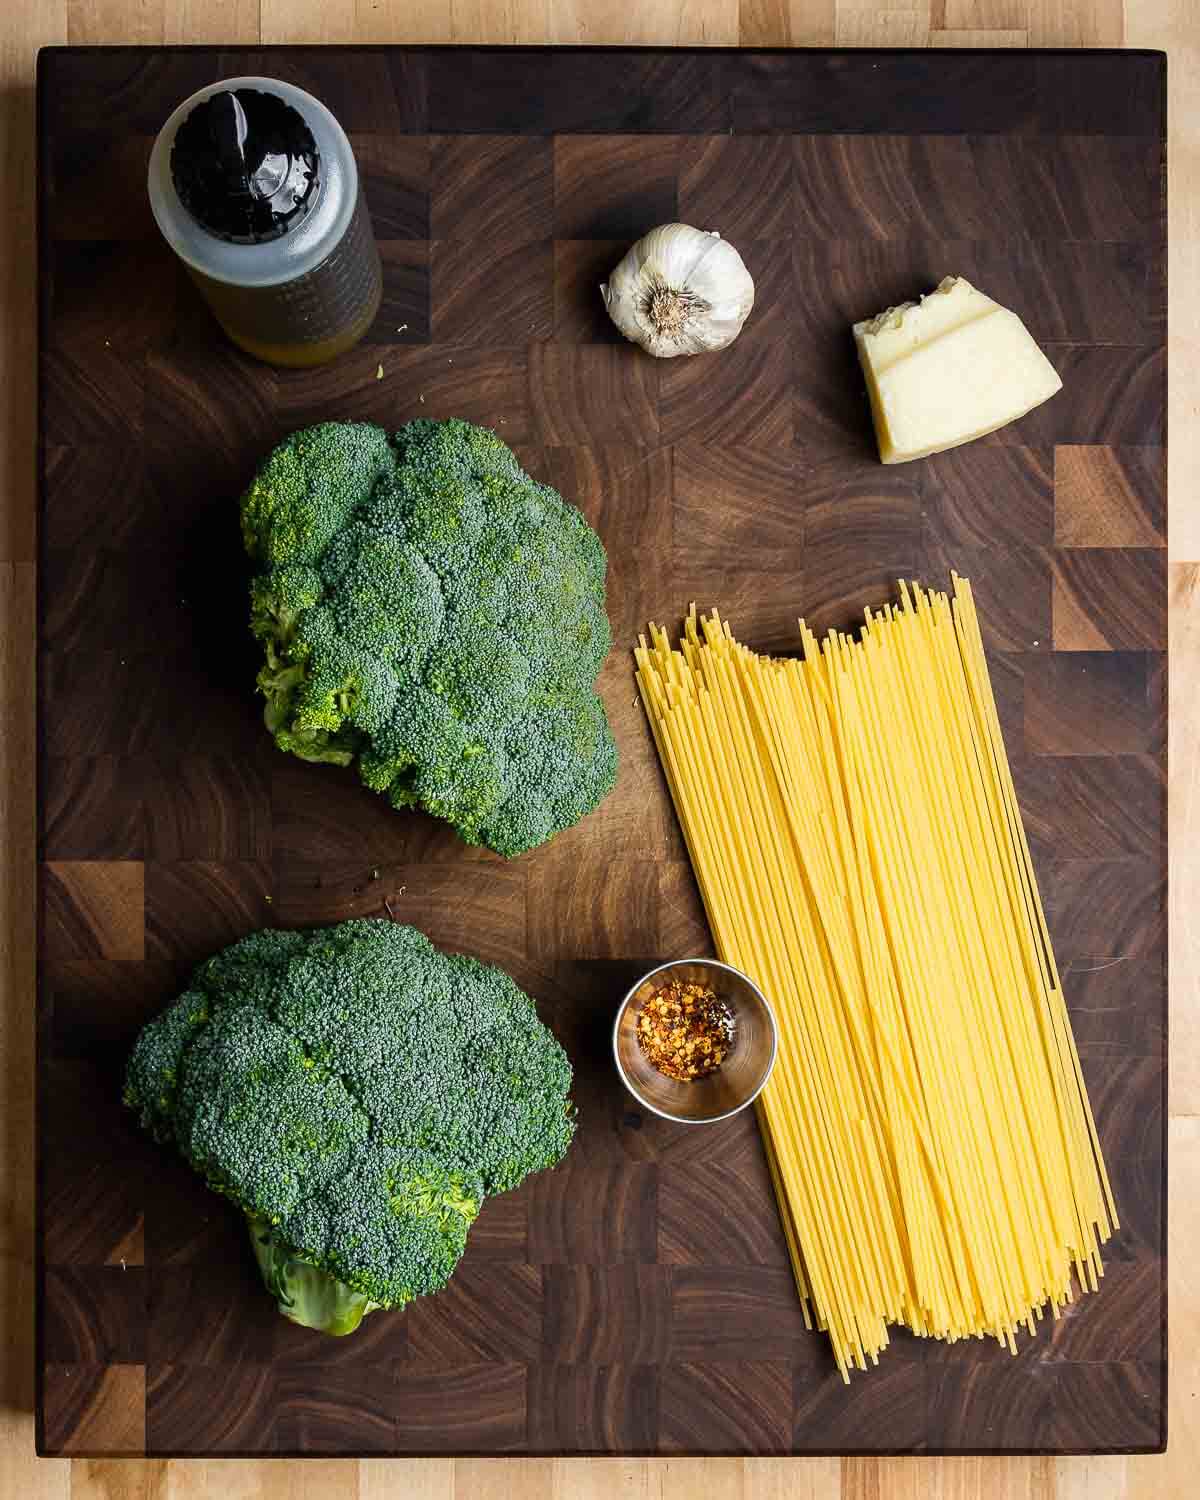 Ingredients shown: extra virgin olive oil, garlic, Pecorino Romano cheese, broccoli, hot red pepper flakes, and spaghetti.